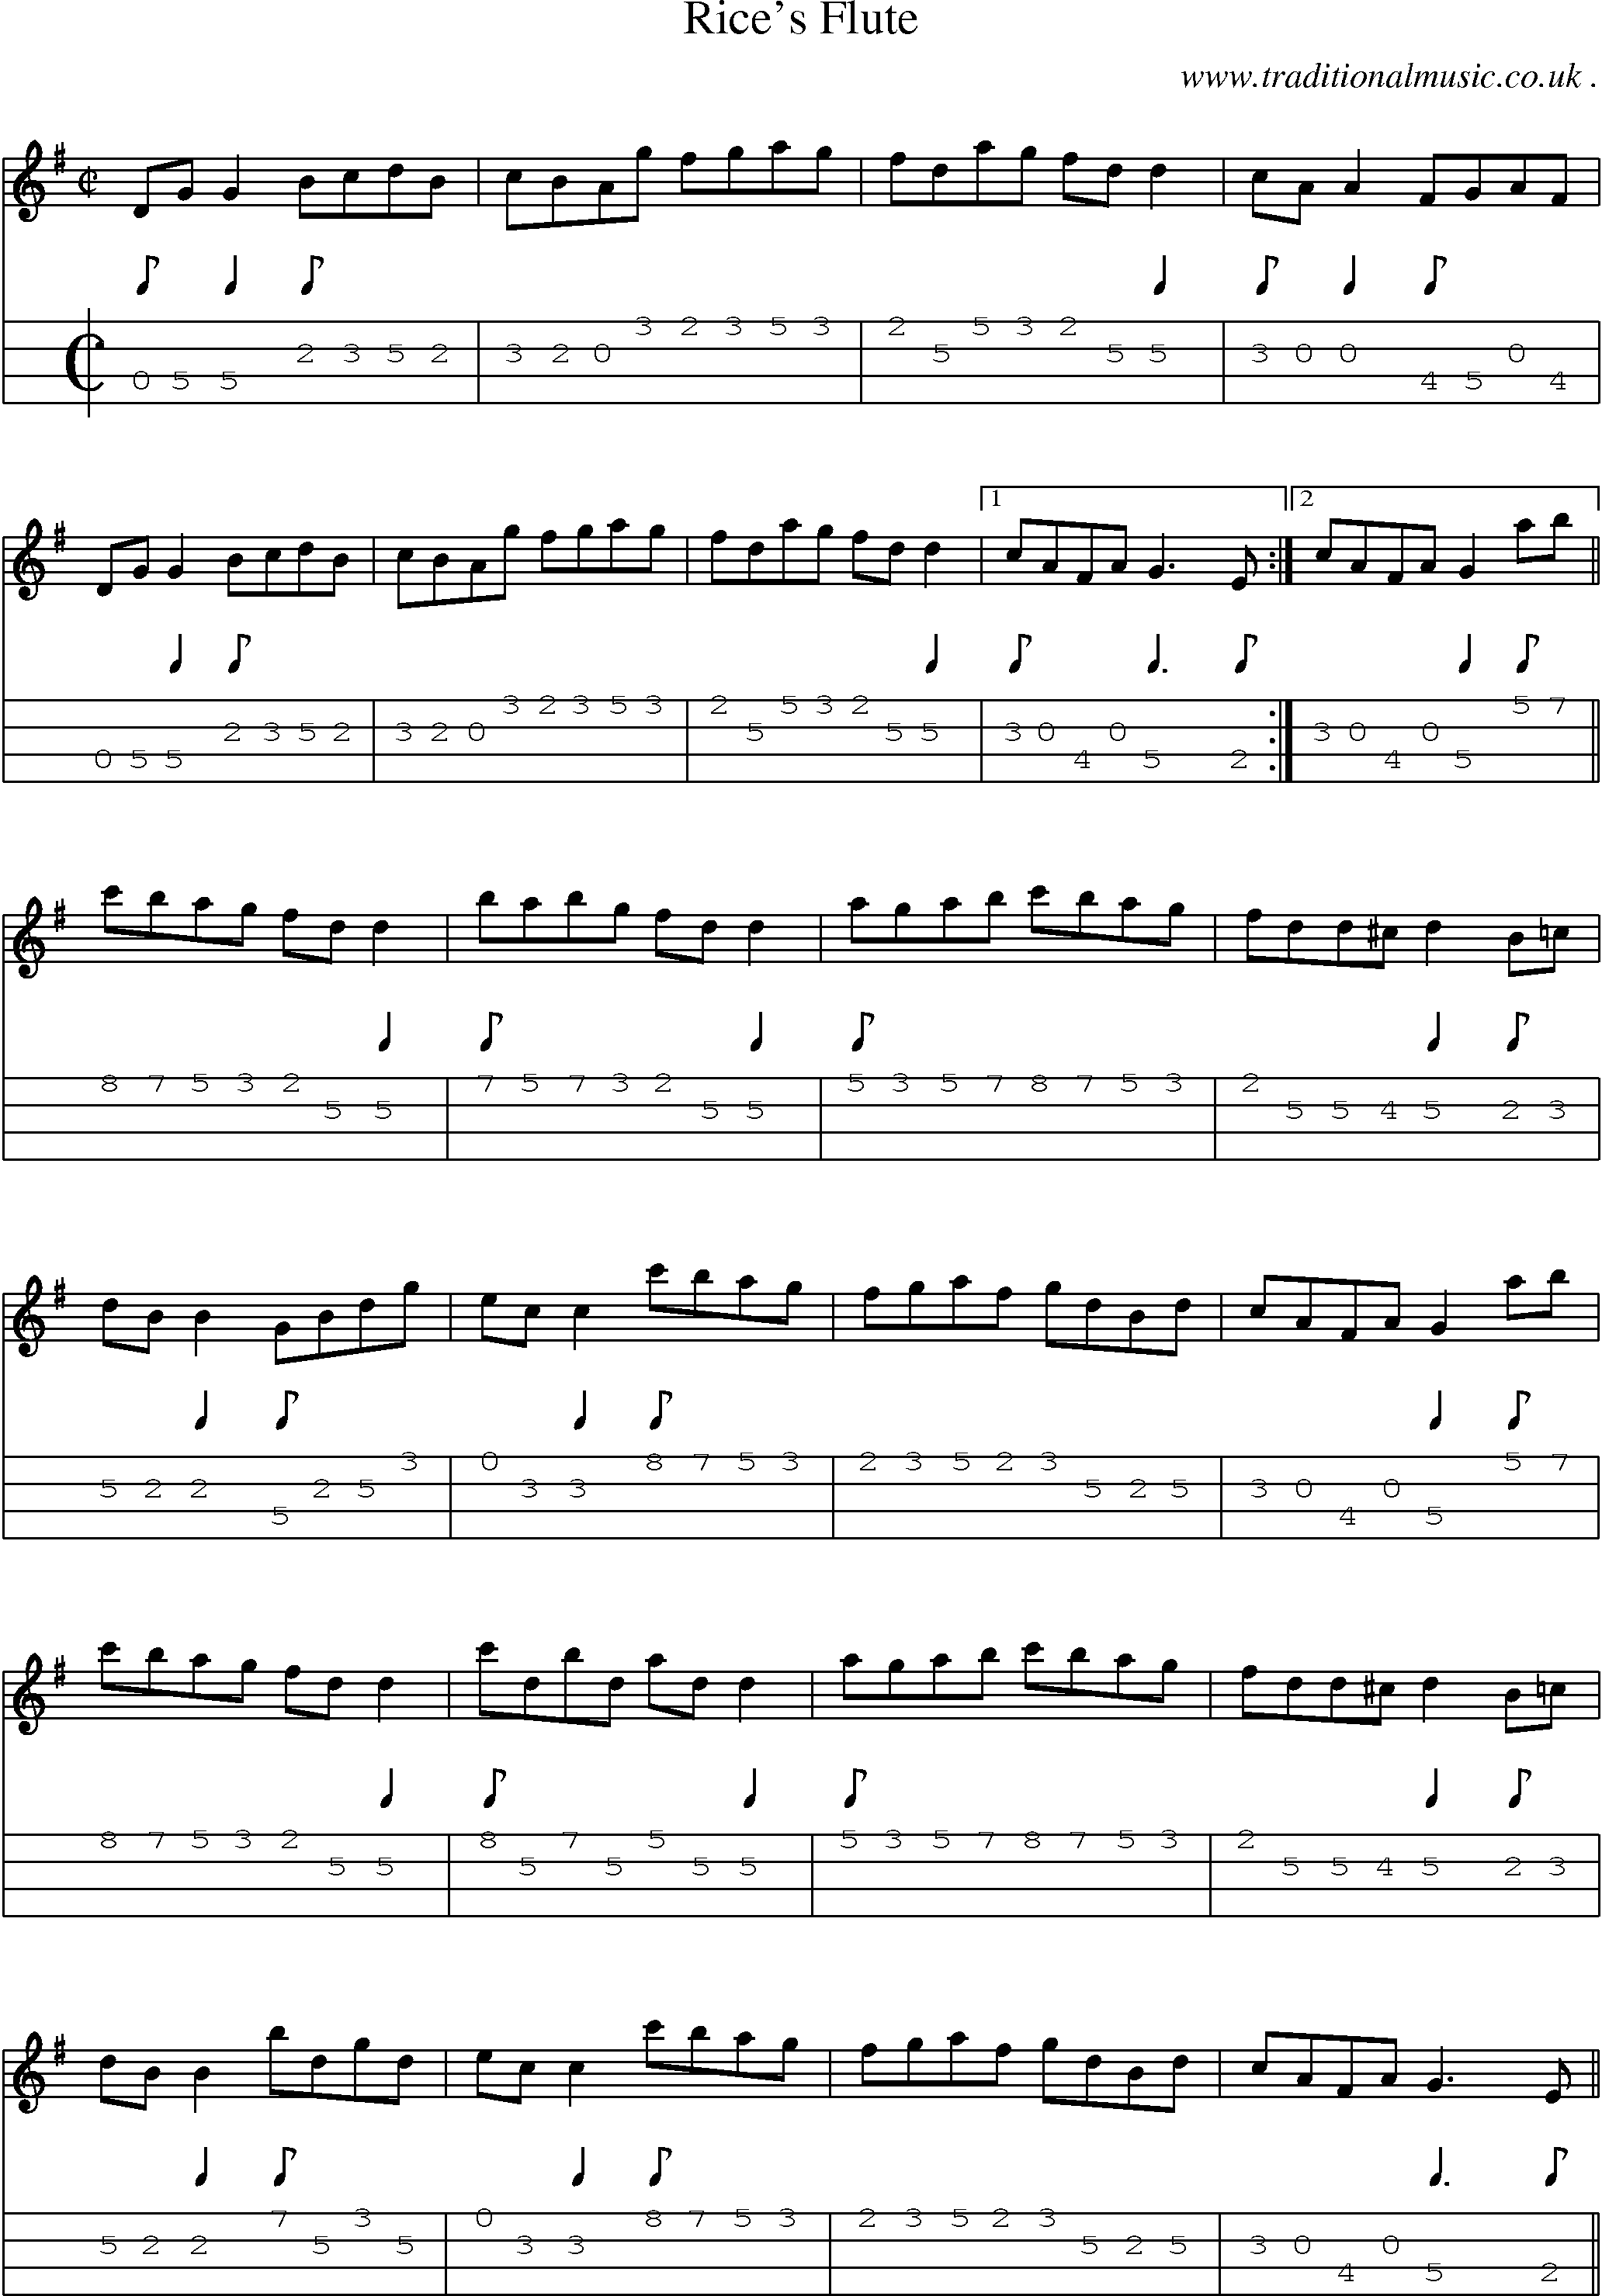 Sheet-Music and Mandolin Tabs for Rices Flute